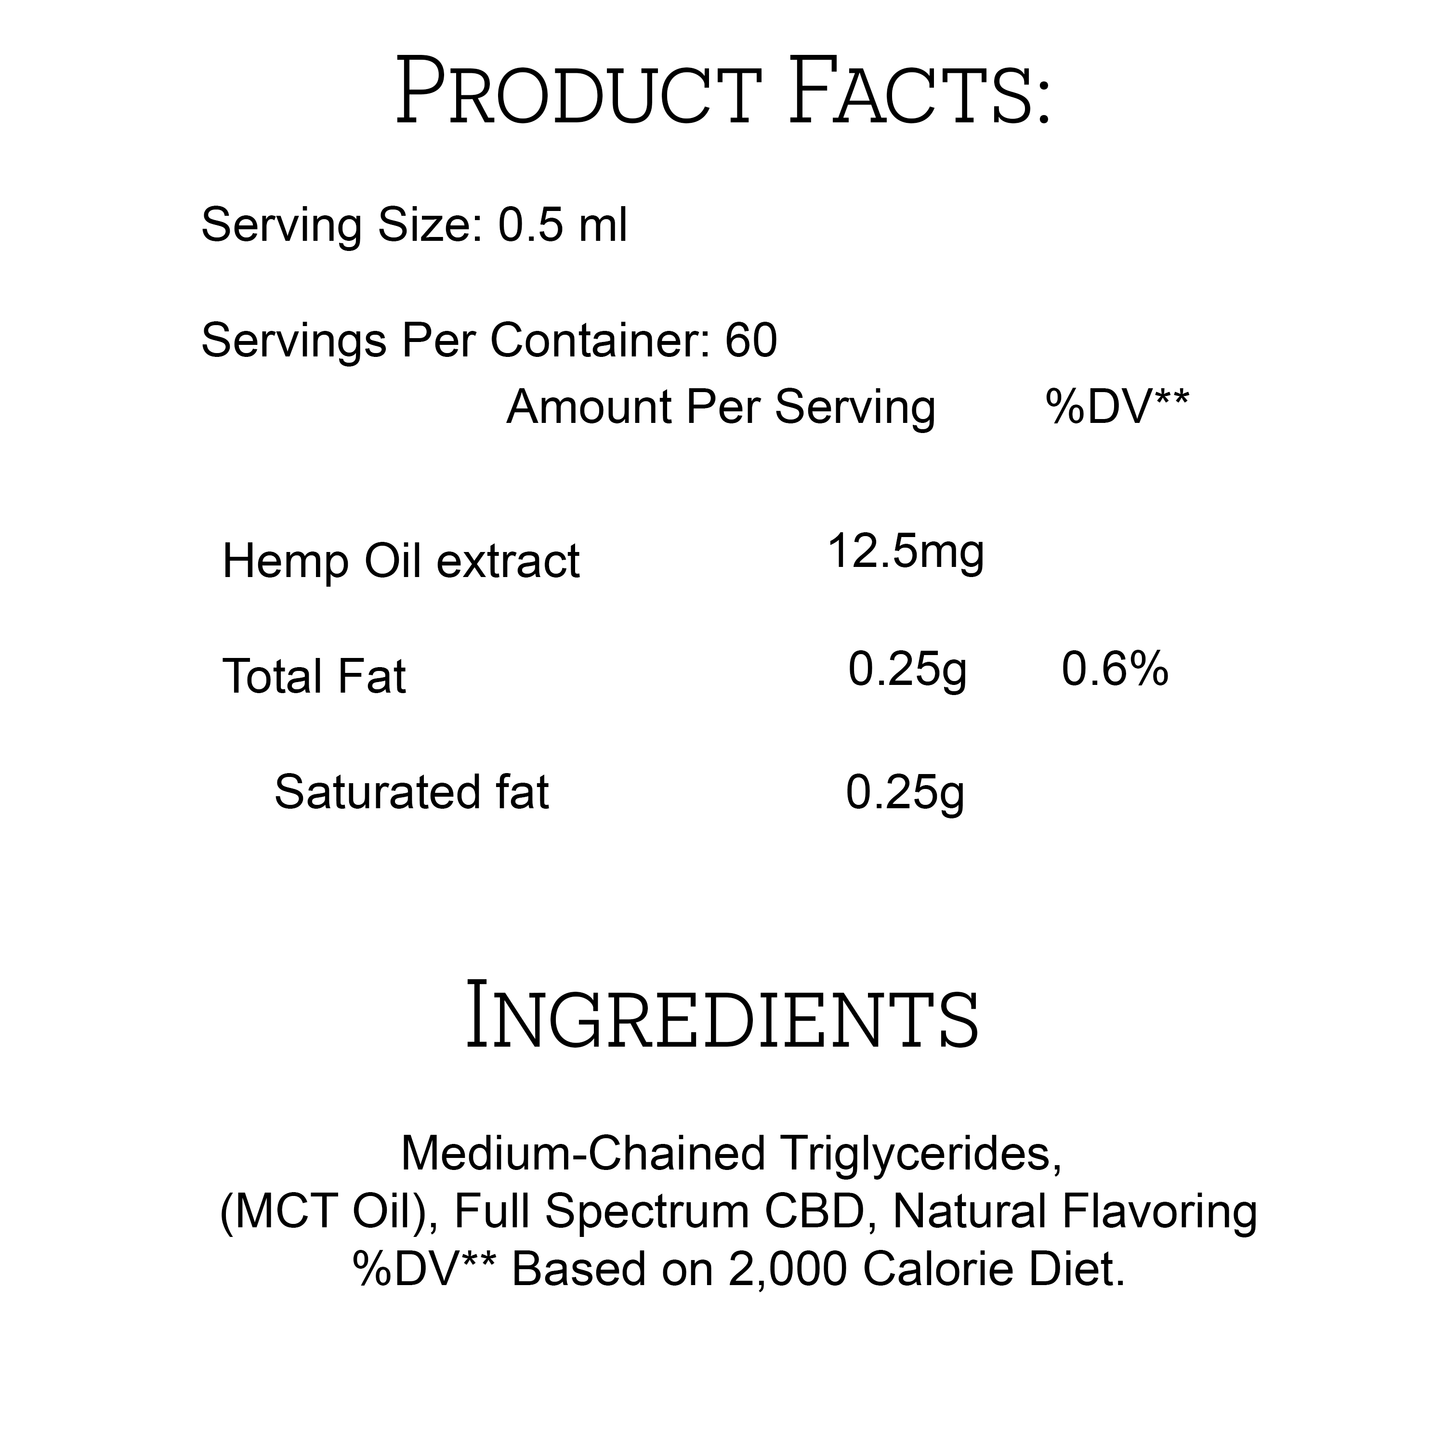 Product label of the Product Facts and Ingredients.